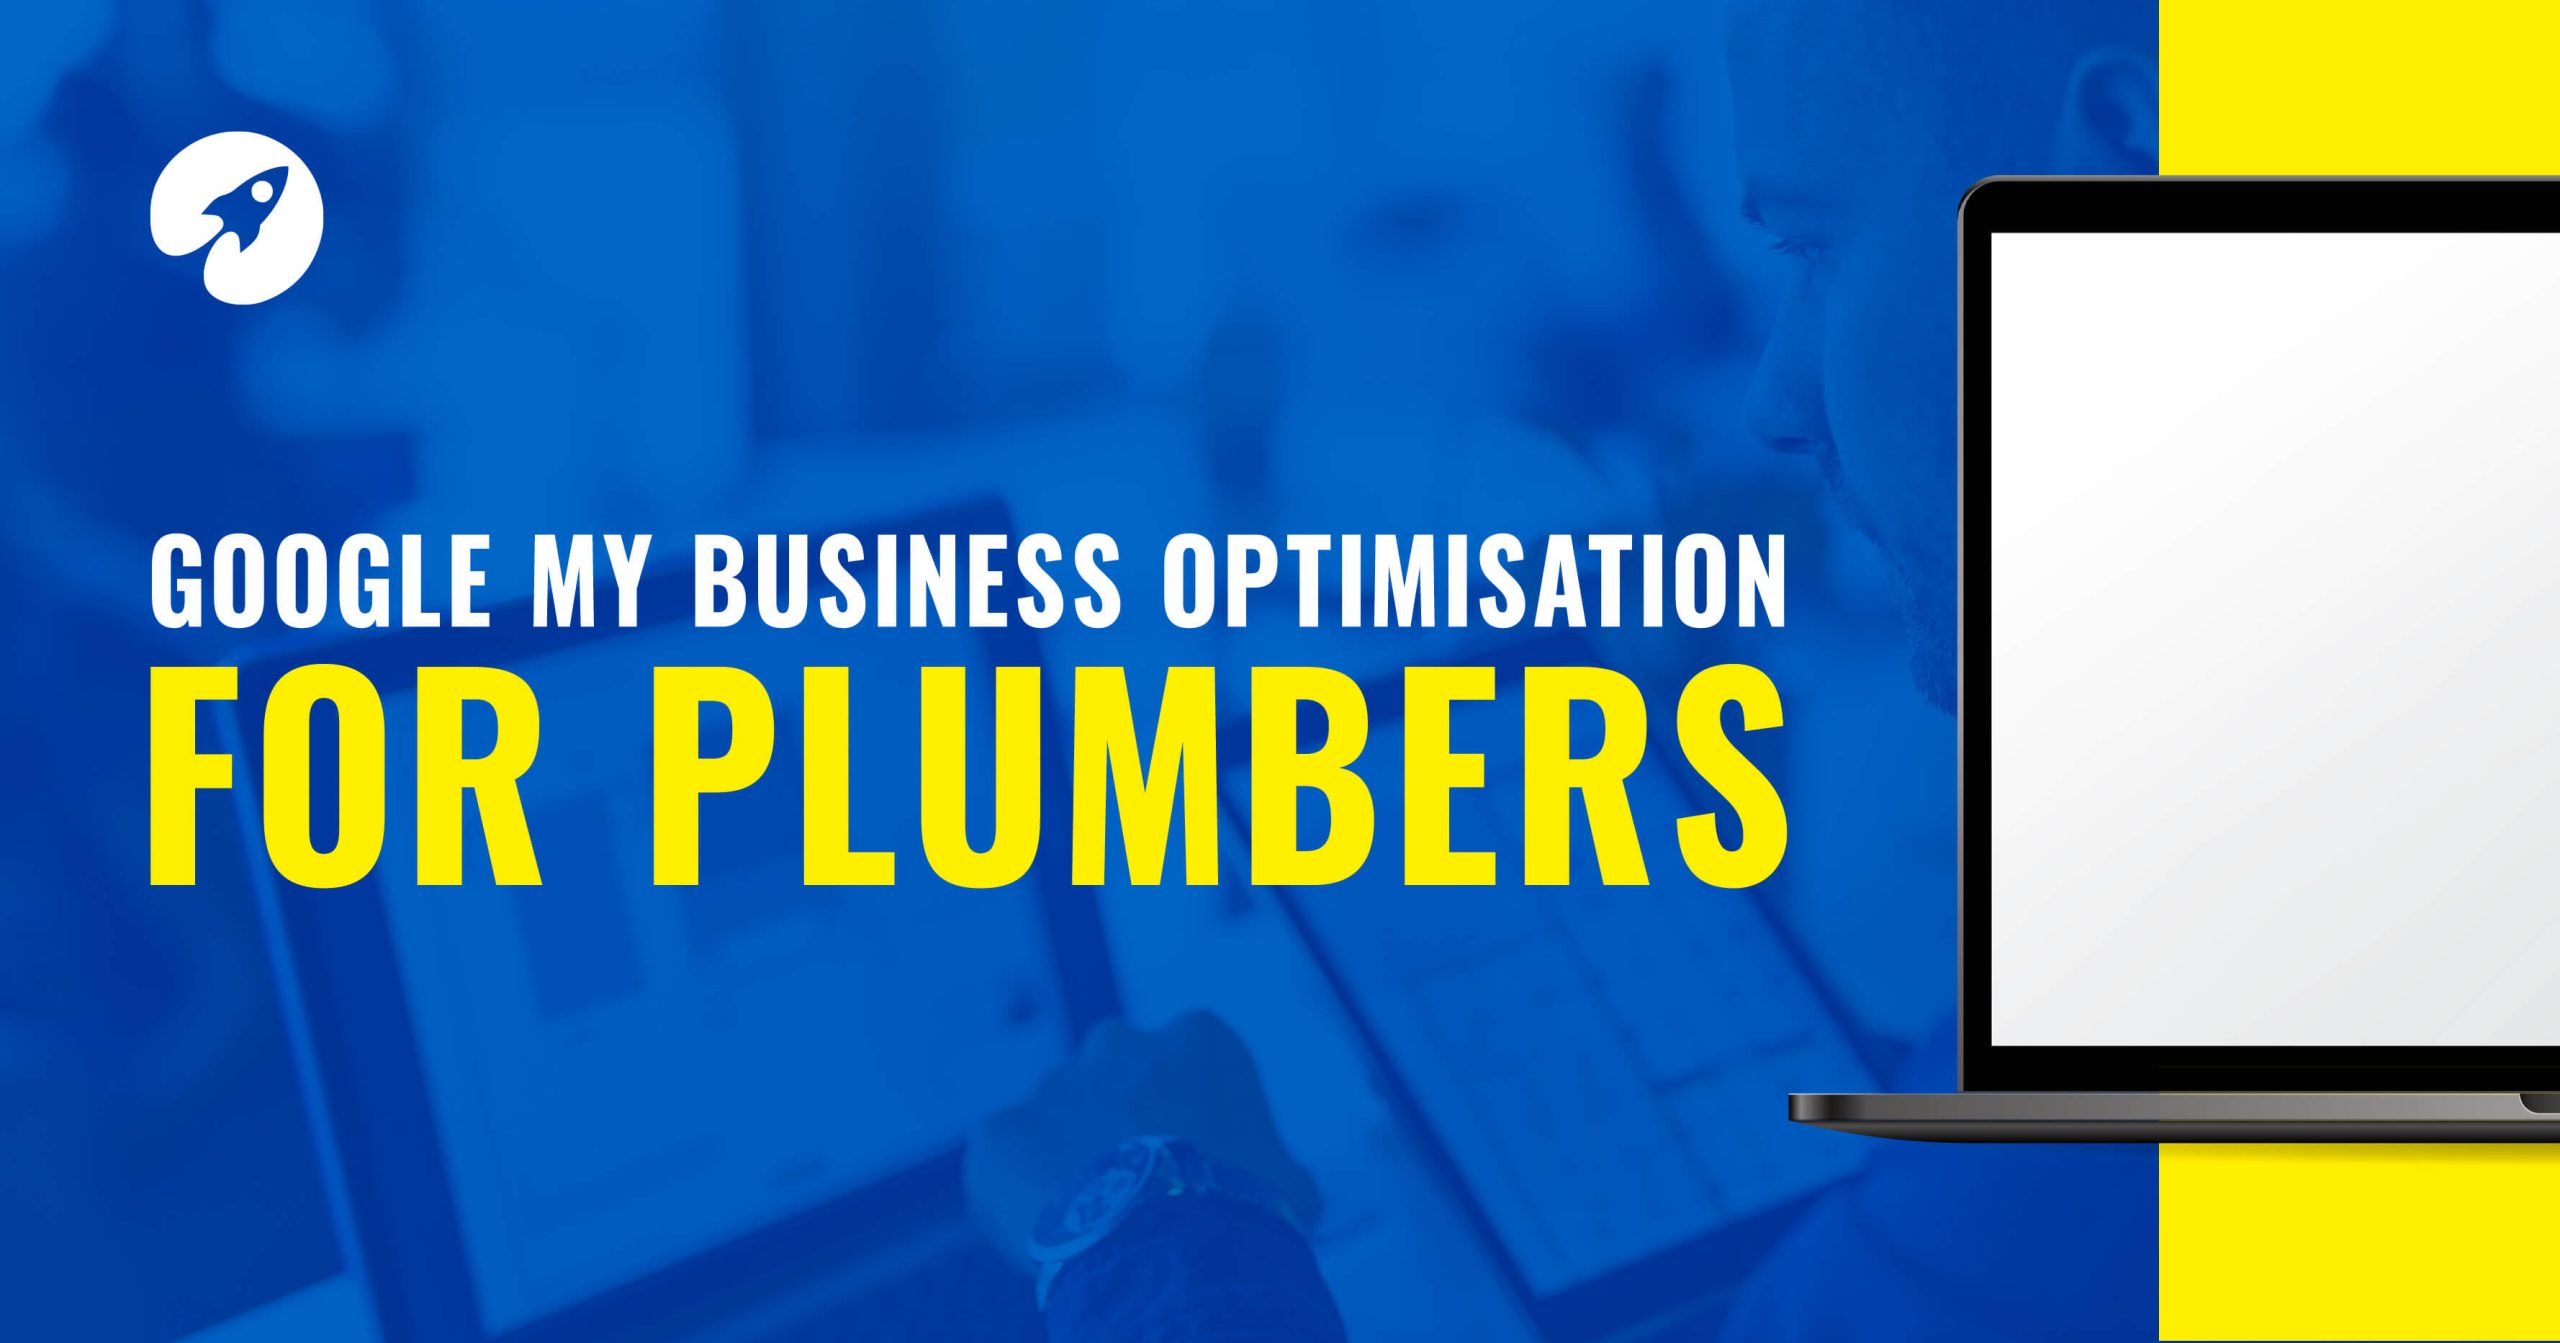 Google My Business Optimisation For Plumbers